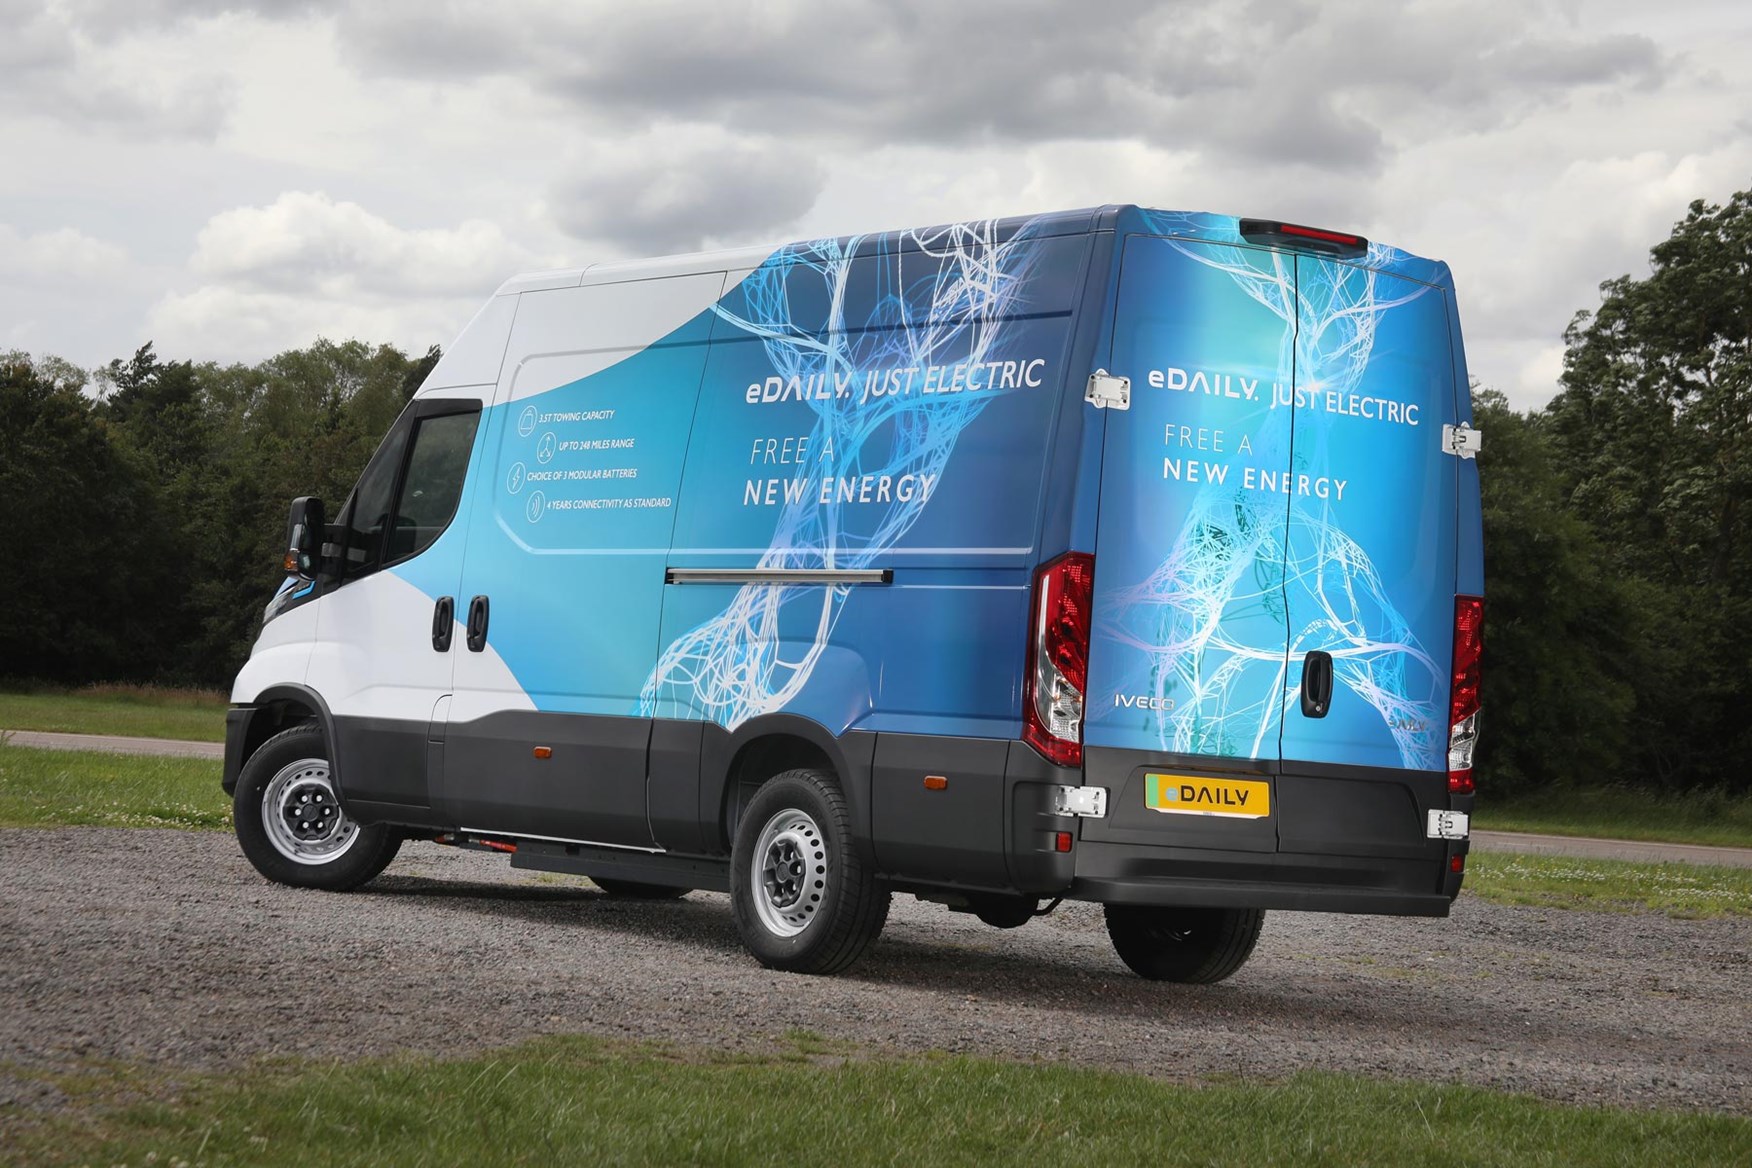 Iveco eDaily offers separate vehicle and battery warranties.